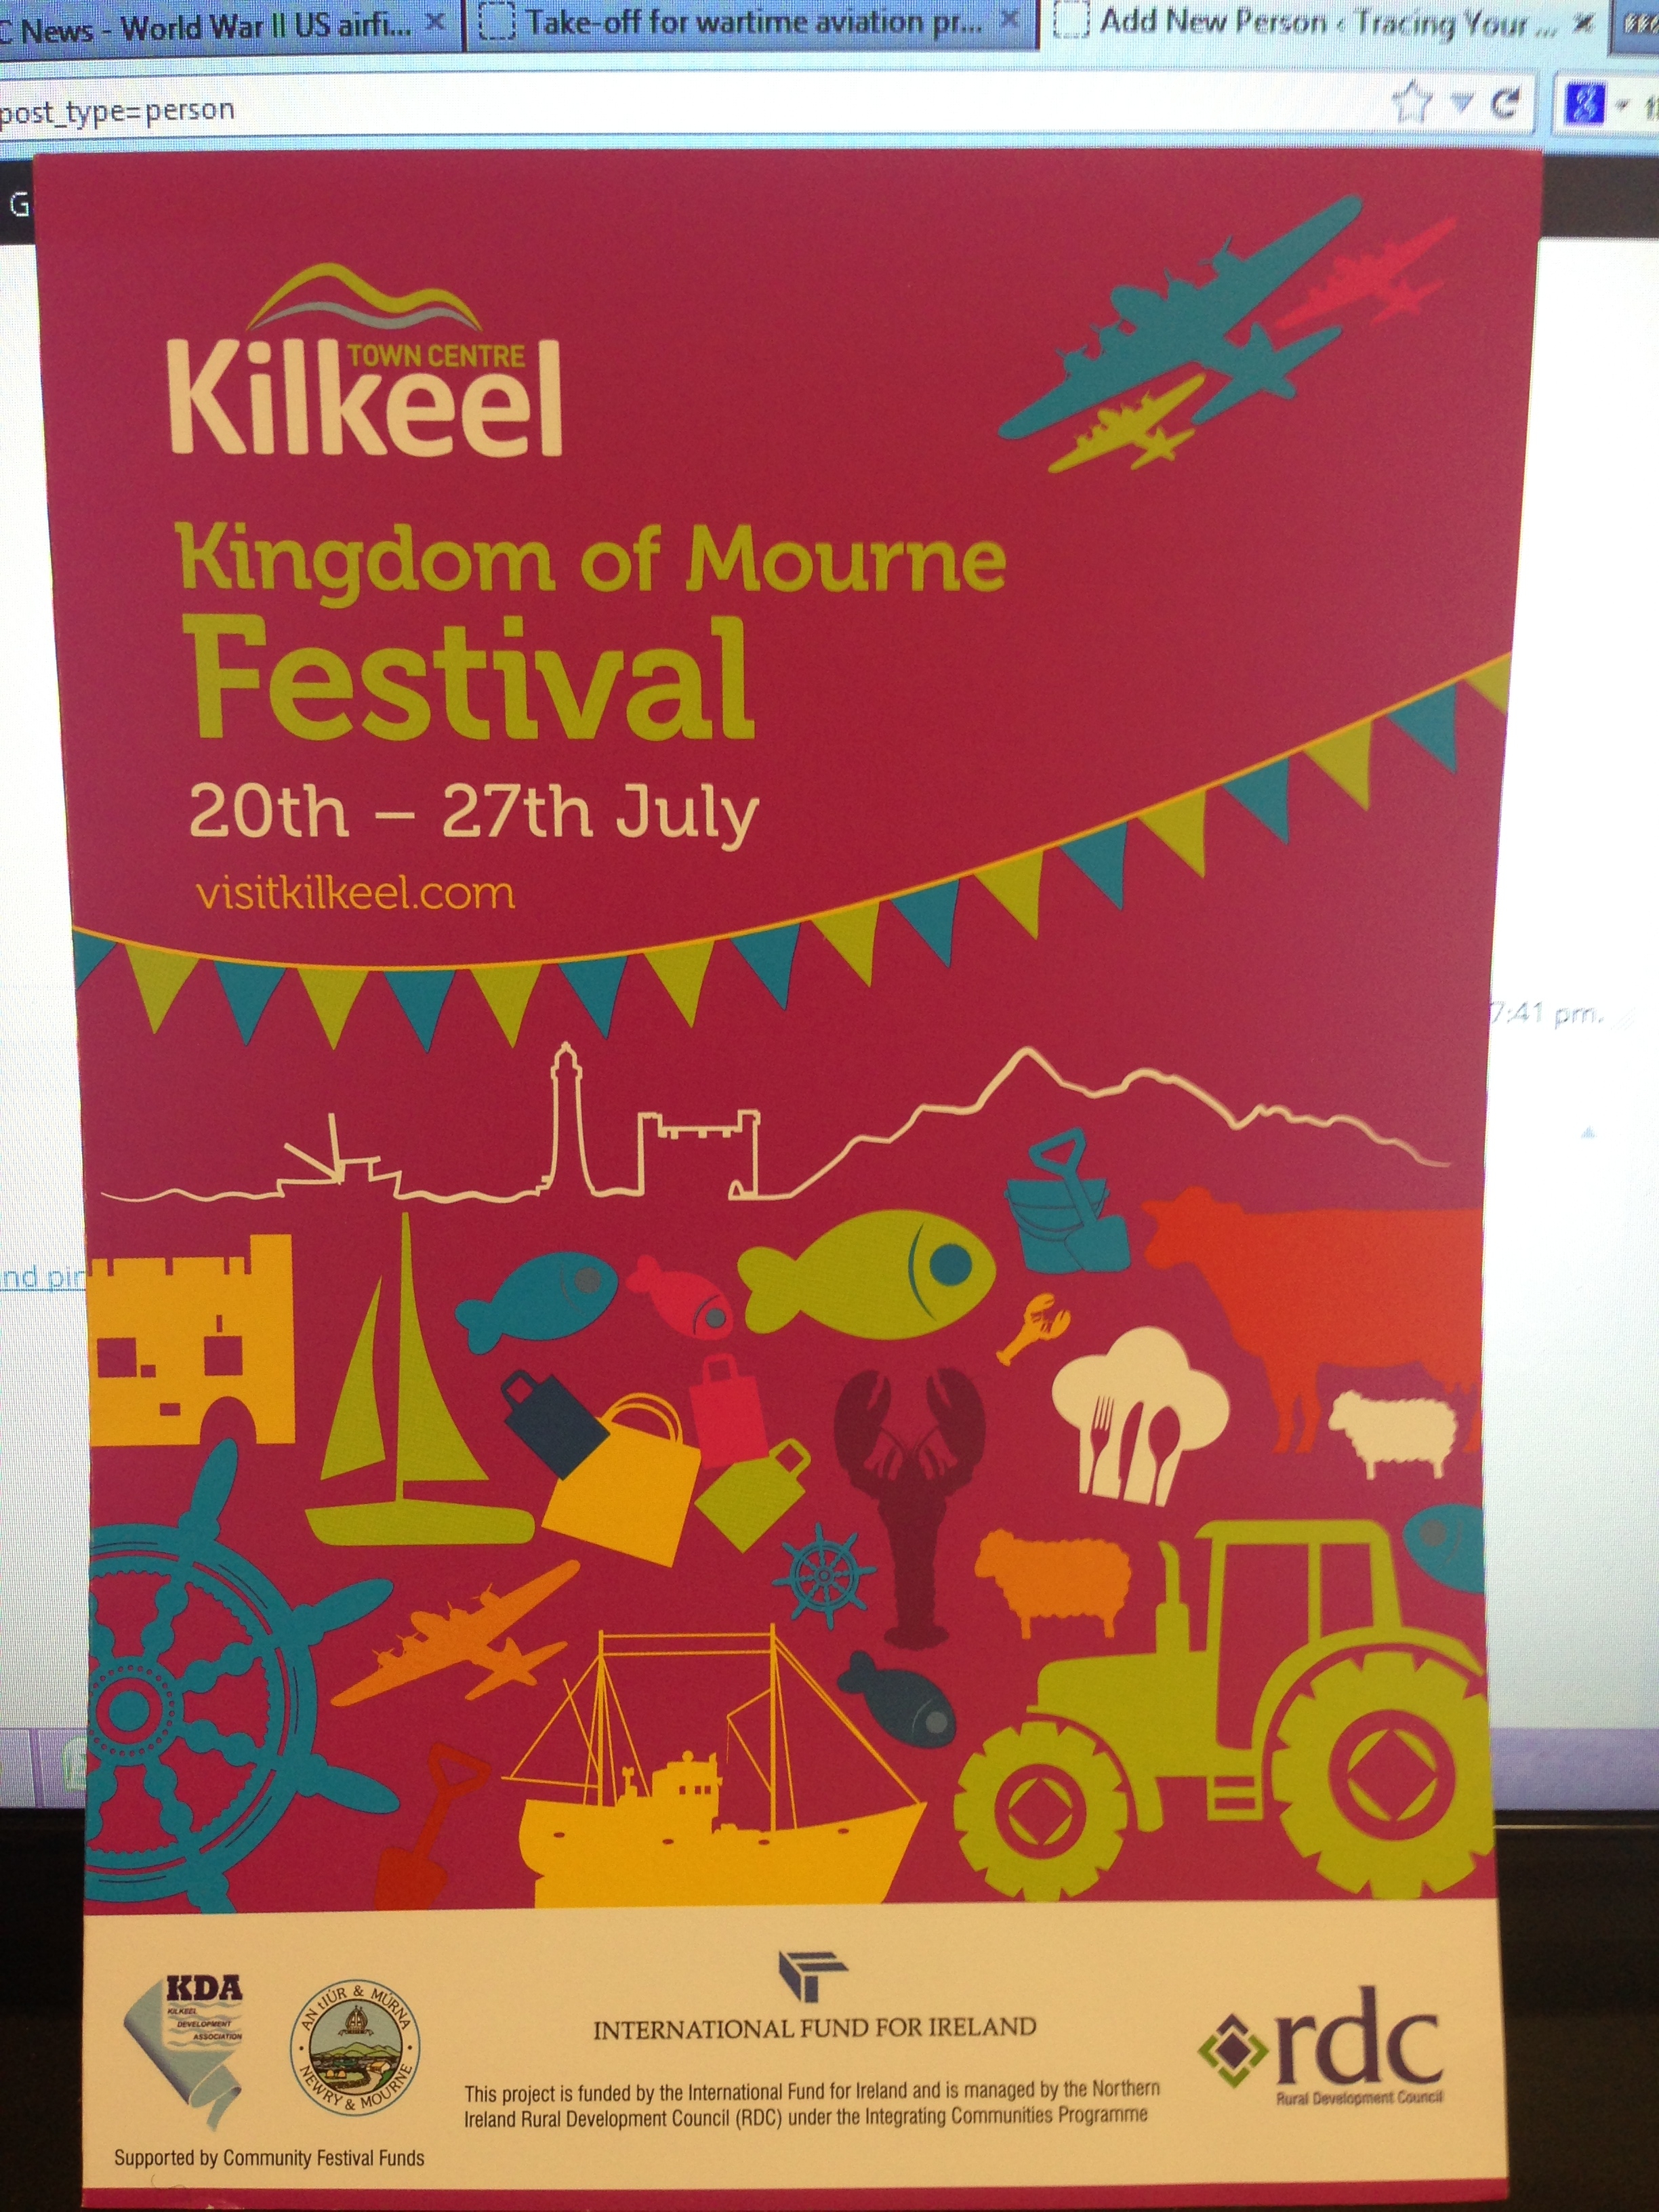 Kingdom of Mourne Festival. TYMR organised a programme of events for this festival in July 2013